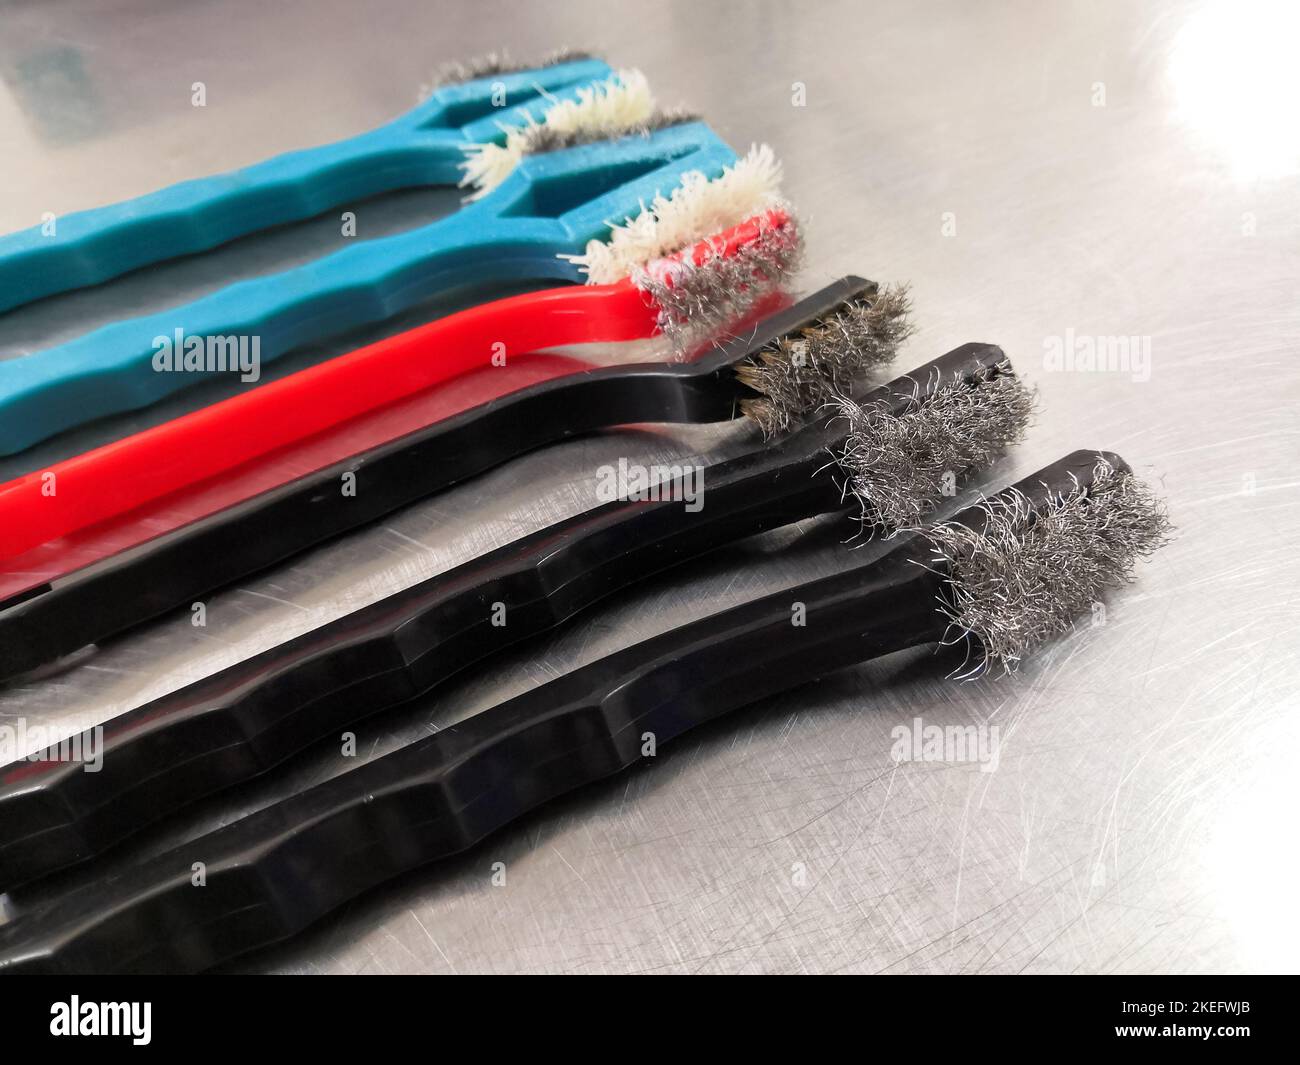 Closeup Image Of Different Types Used Of Surgical Instrument Cleaning Brushes Stock Photo